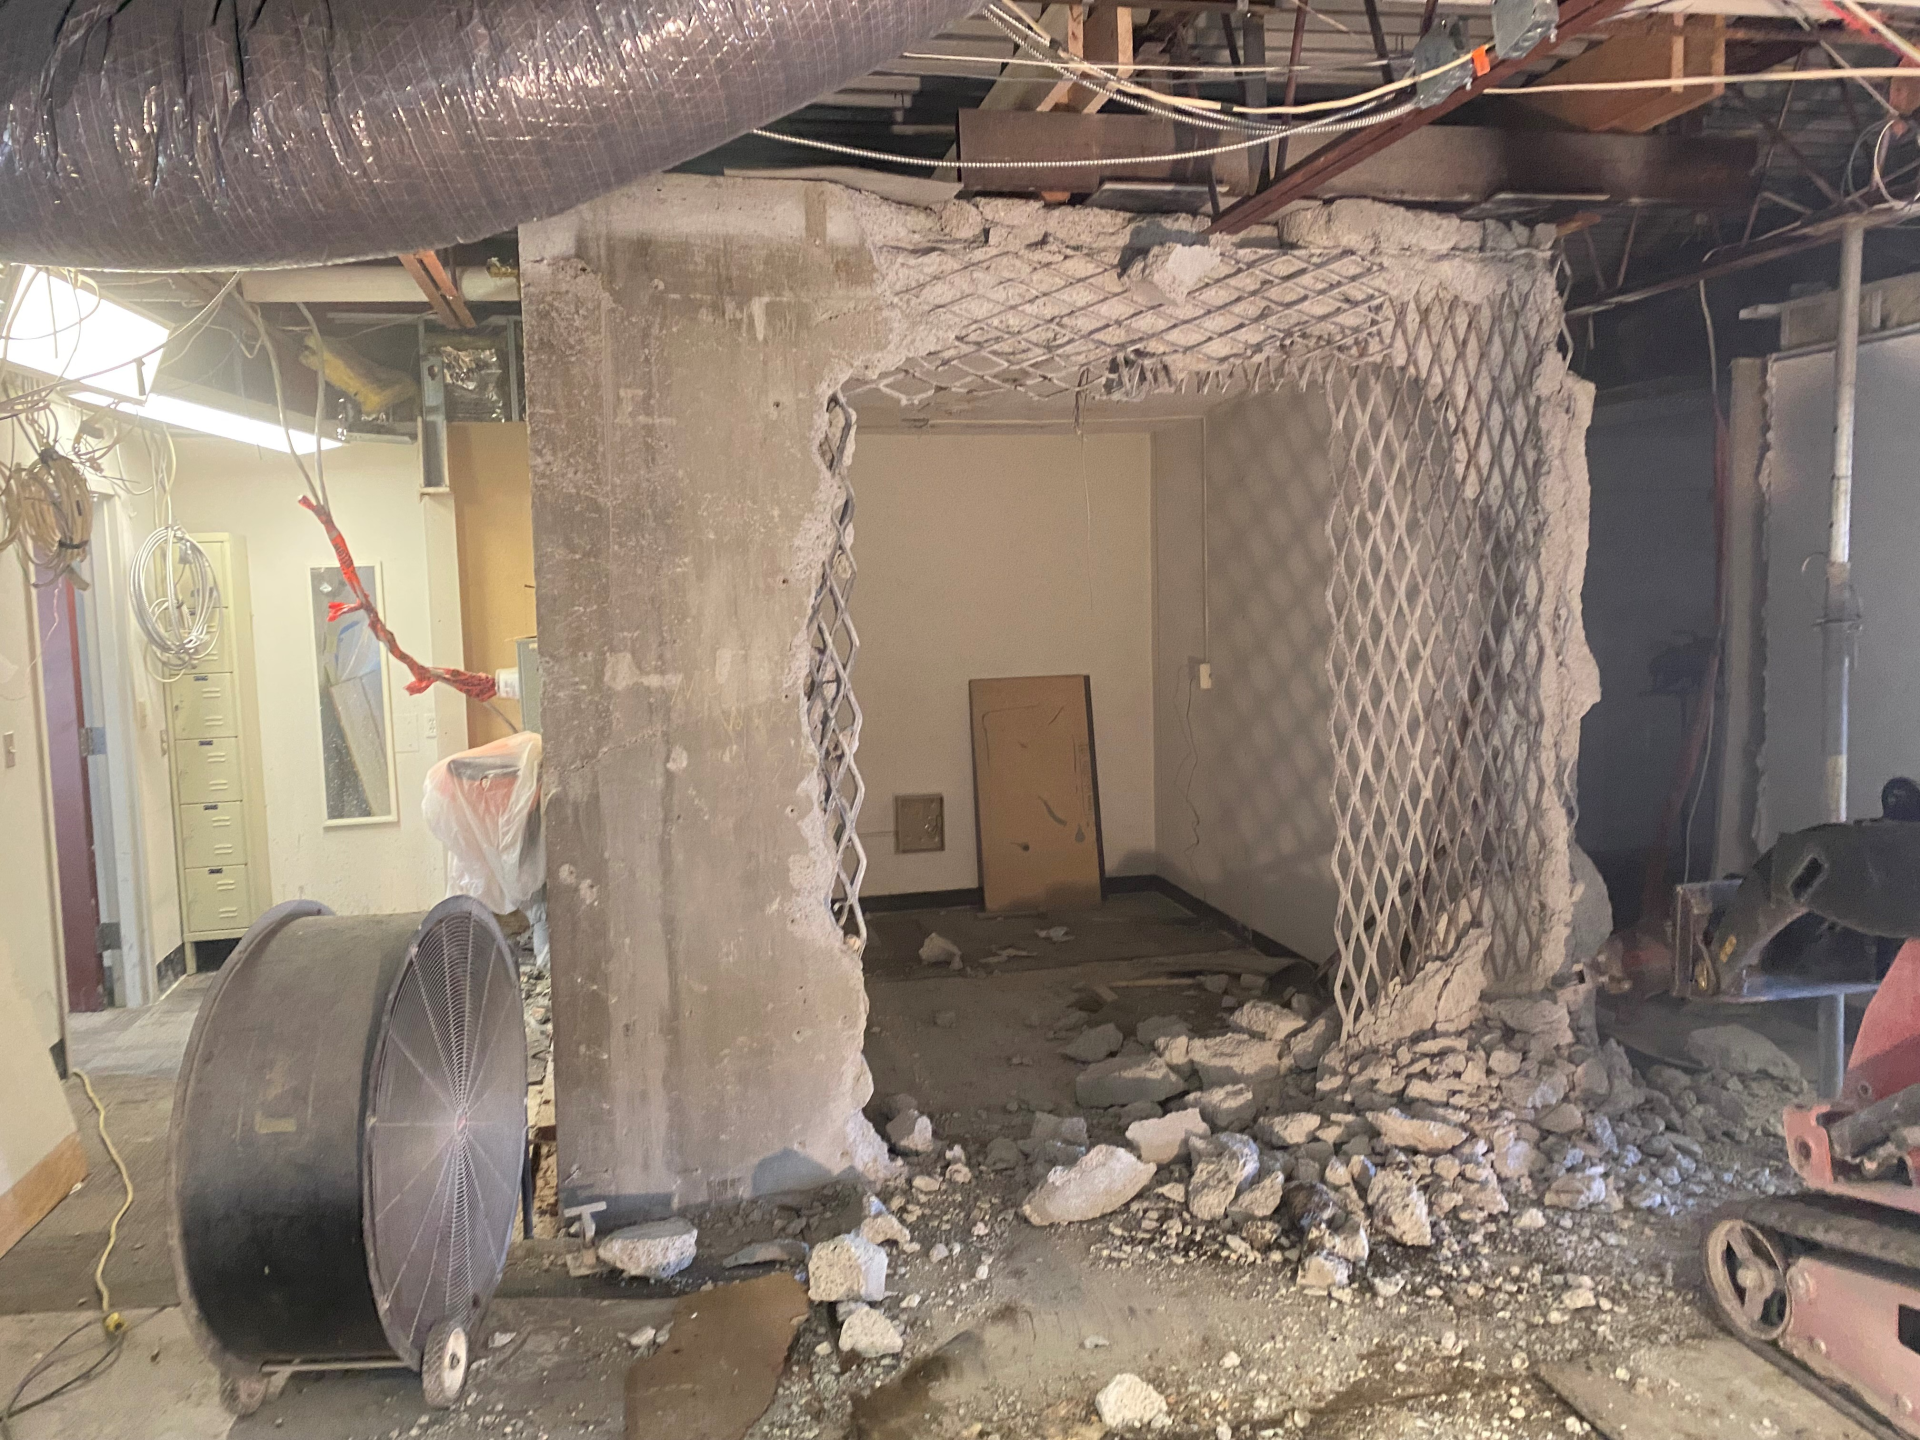 A concrete wall is being demolished in a room.